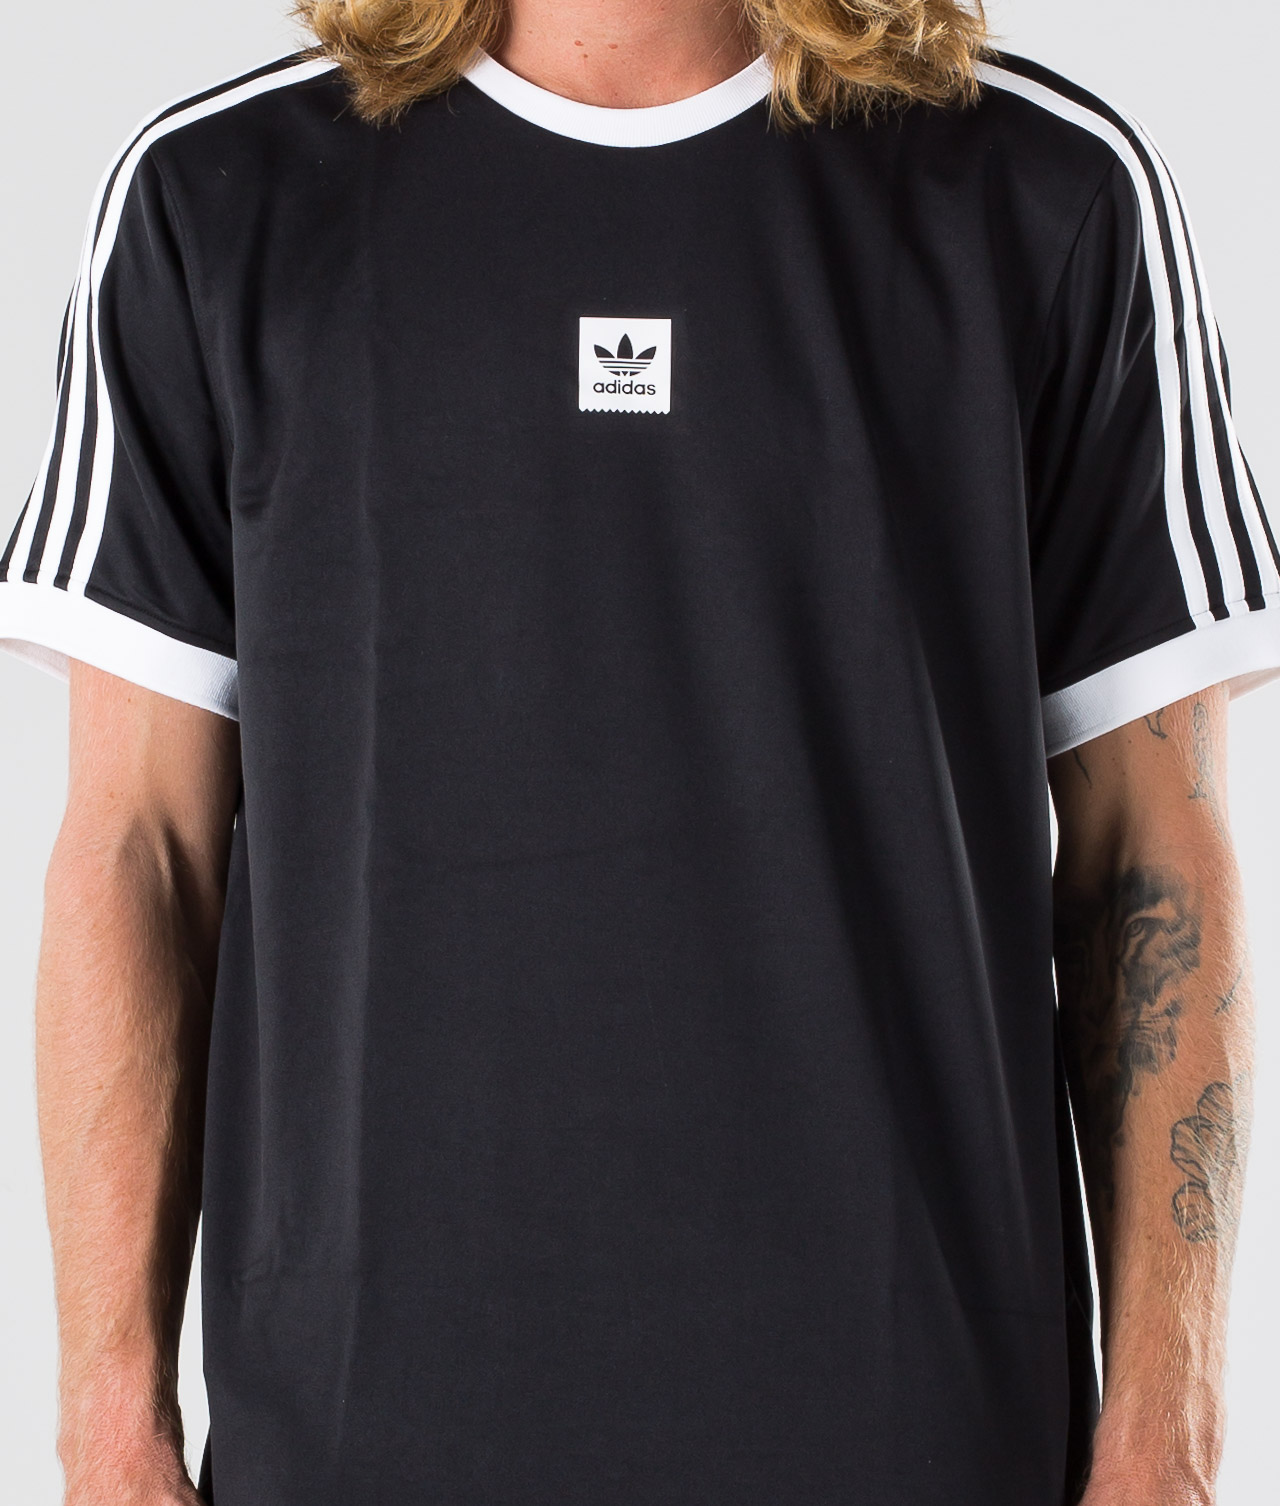 adidas outfit black and white